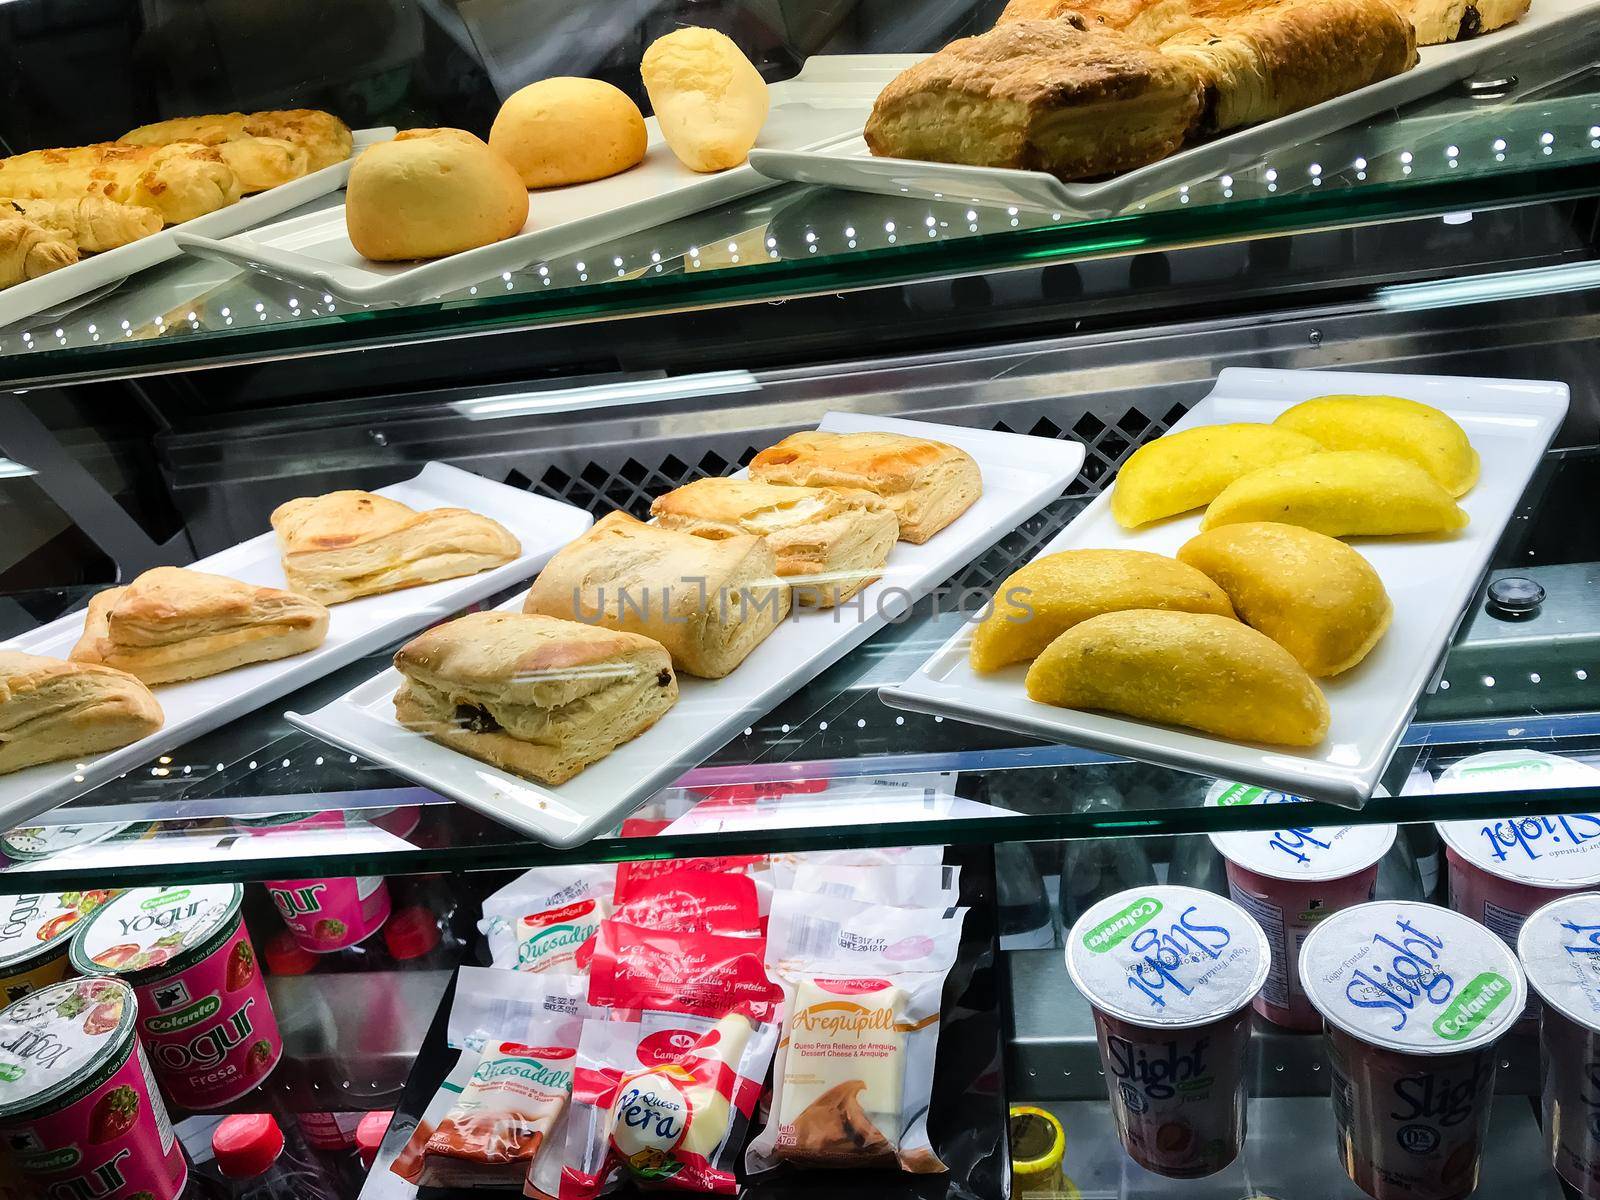 Empanadas and croissants in Colombian bakery. Fresh baked goods